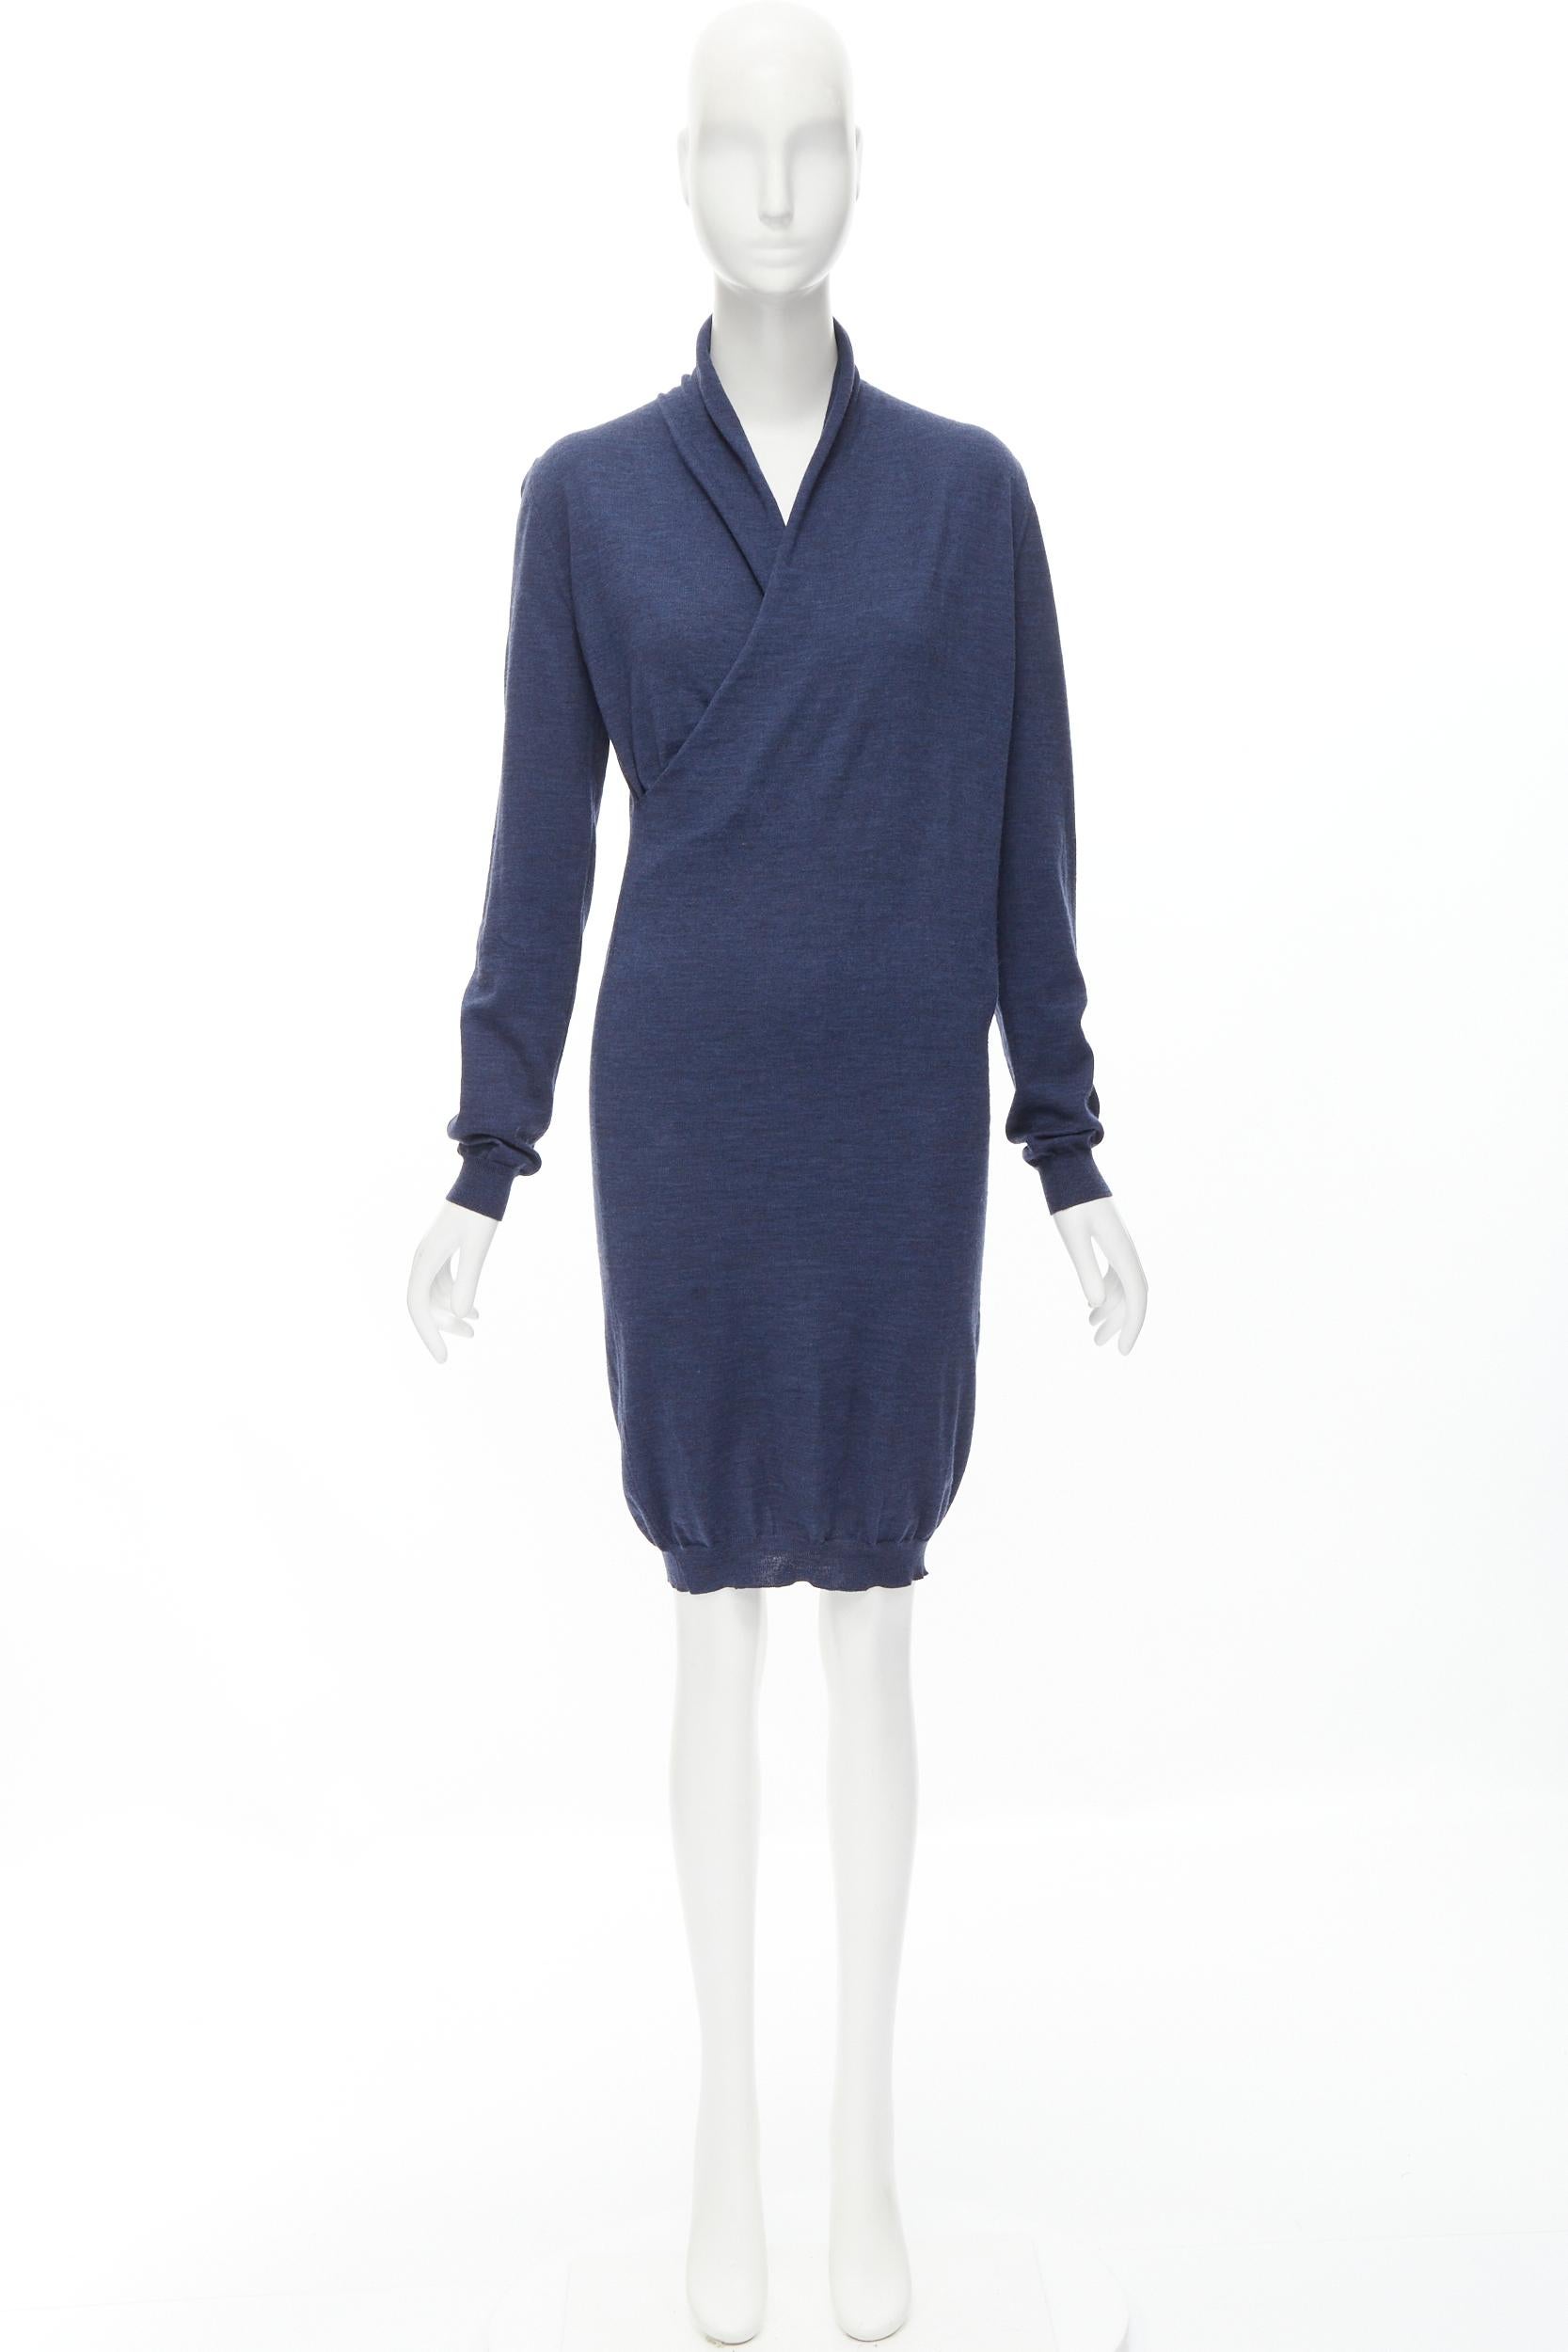 LANVIN Alber Elbaz Les 10 Ans 100% wool wrap neckline knitted dress S 
Reference: JNWG/A00026 
Brand: Lanvin 
Designer: Alber Elbaz 
Collection: Les 10 Ans 
Material: Wool 
Color: Blue 
Pattern: Solid 
Extra Detail: Wrap front. Knitted dress.